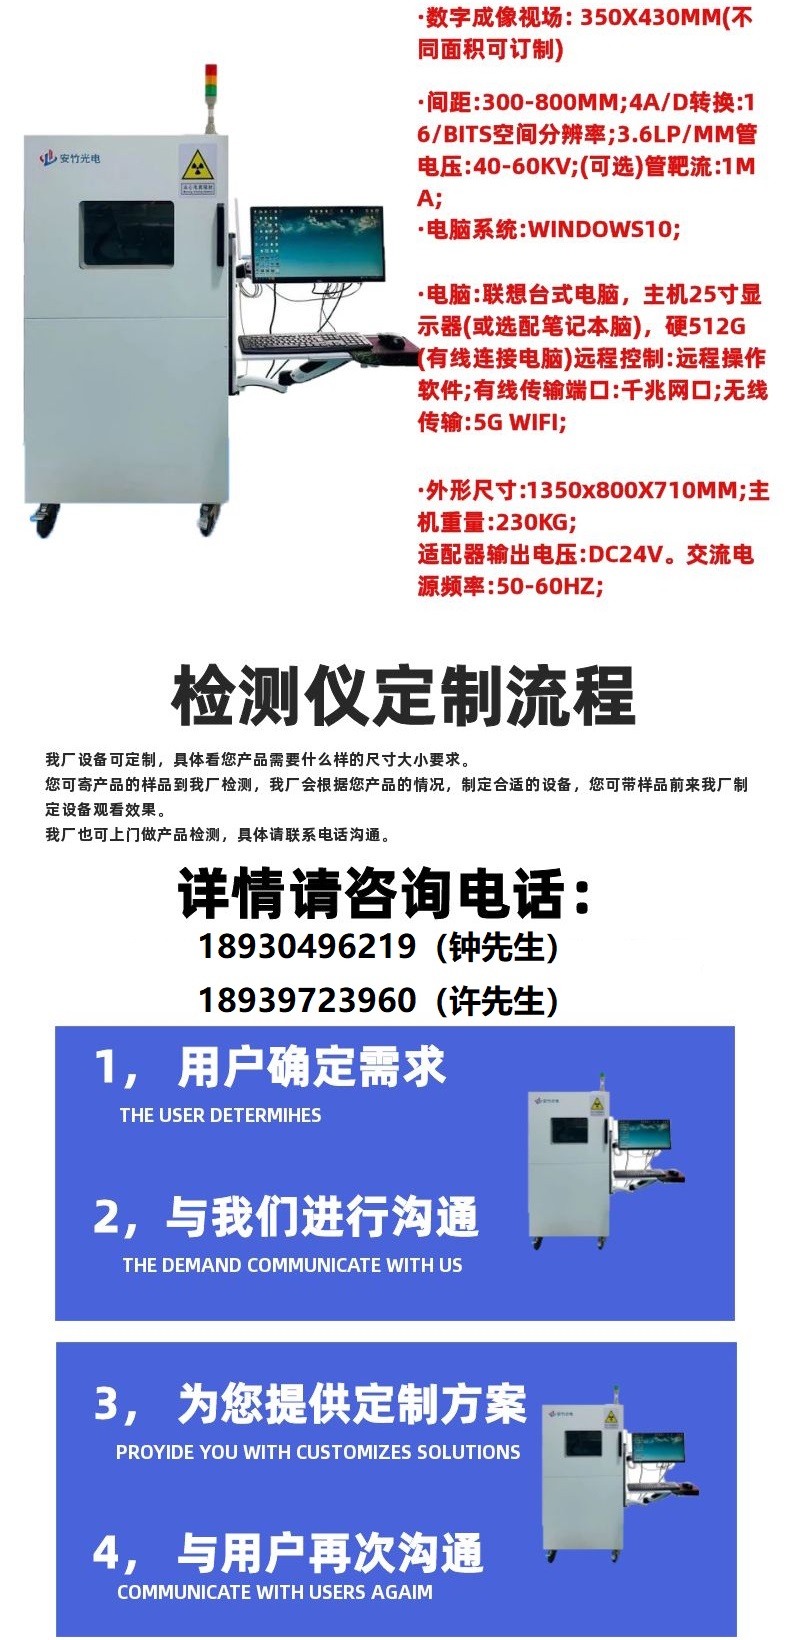 Industrial X-ray machine X-ray generator NDT flaw detector Crack, crack, pore and bubble detection